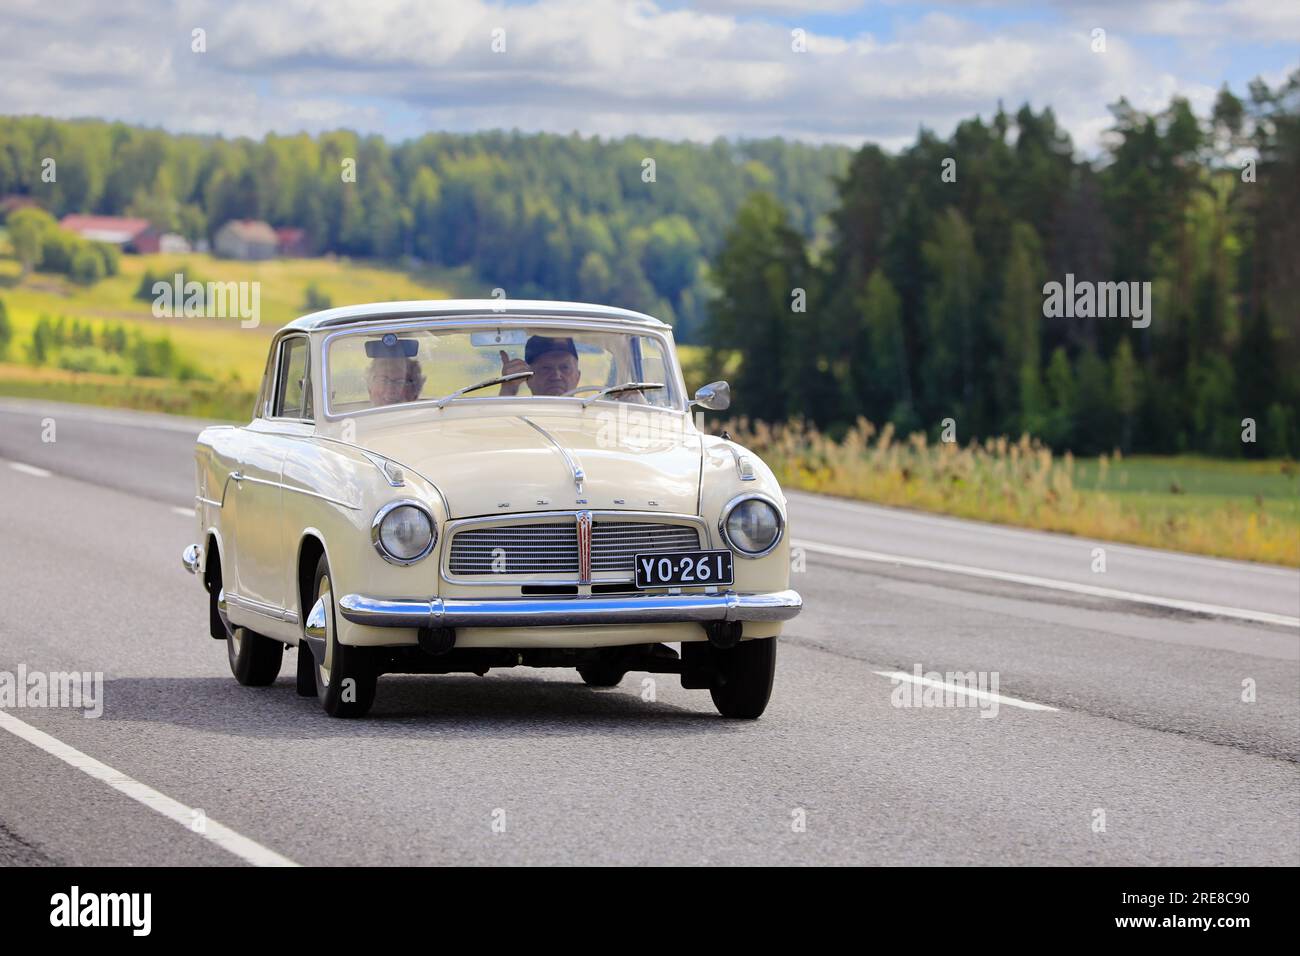 This rare Goliath Hansa 1100 Coupe classic car manufactured by Borgward is the only one owned and based in Finland. Salo, Finland. July 22, 2023. Stock Photo